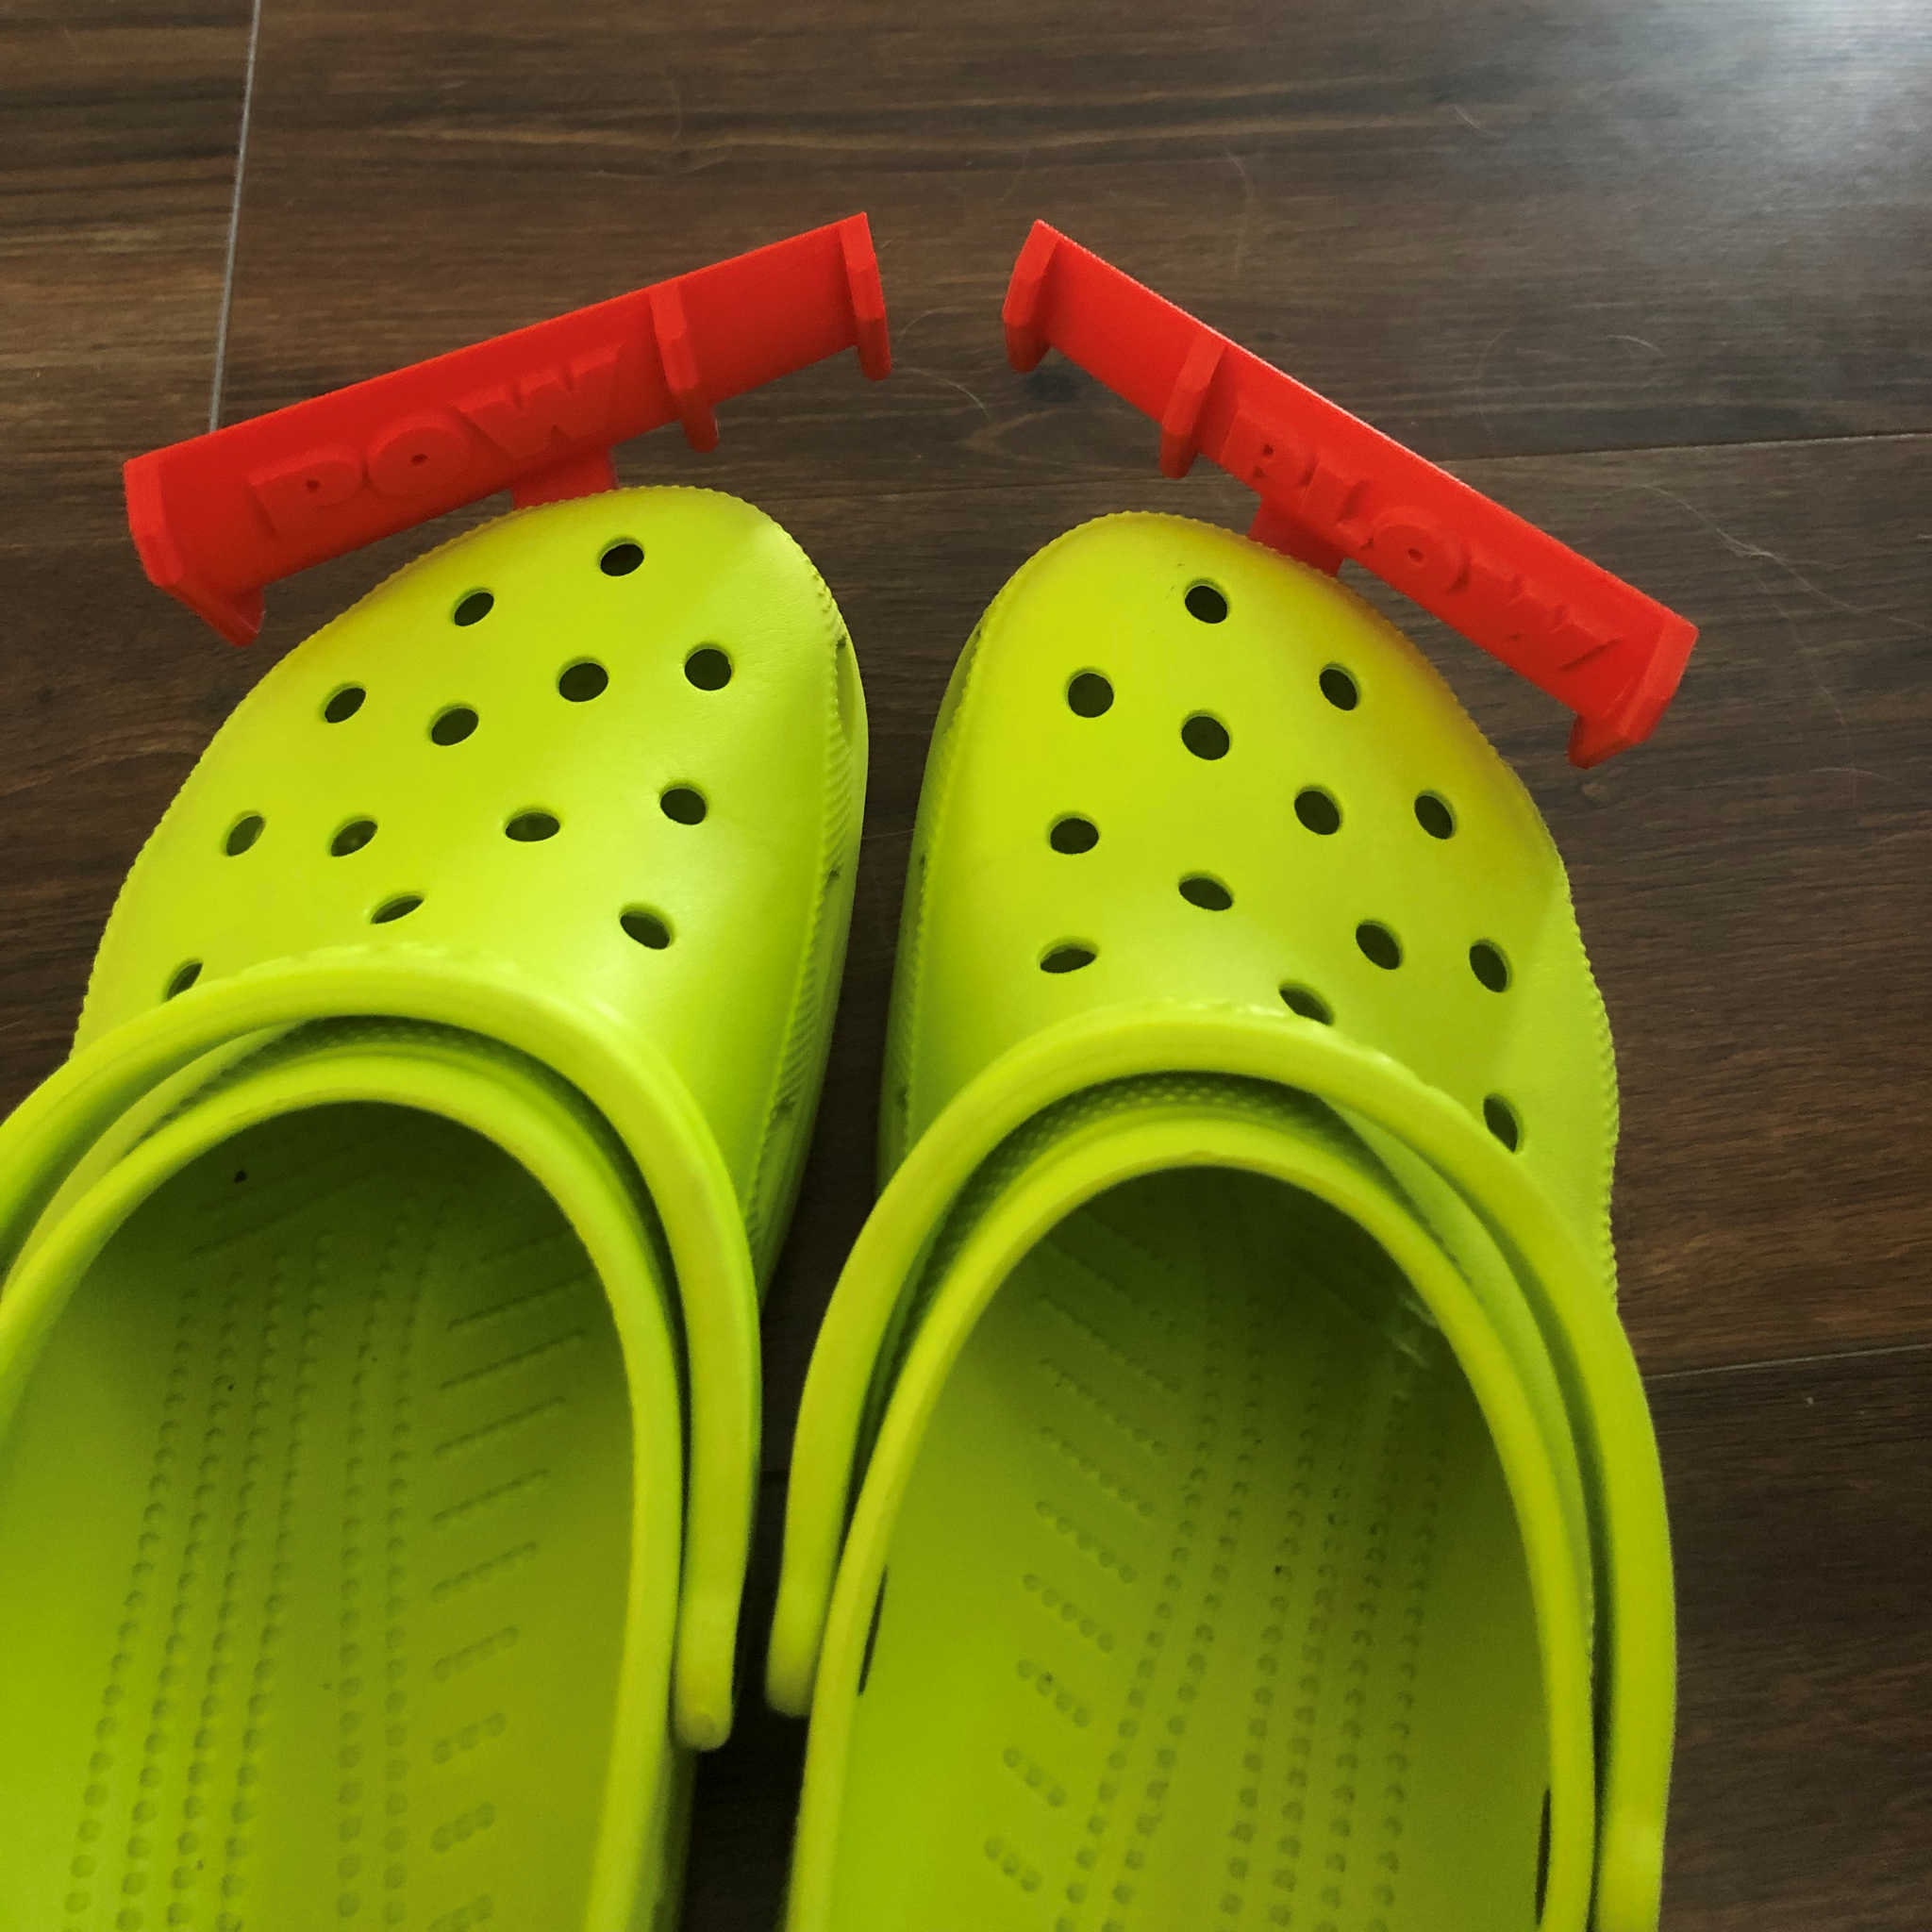 Novelty Snow Plows for Pair of Crocs -  Canada